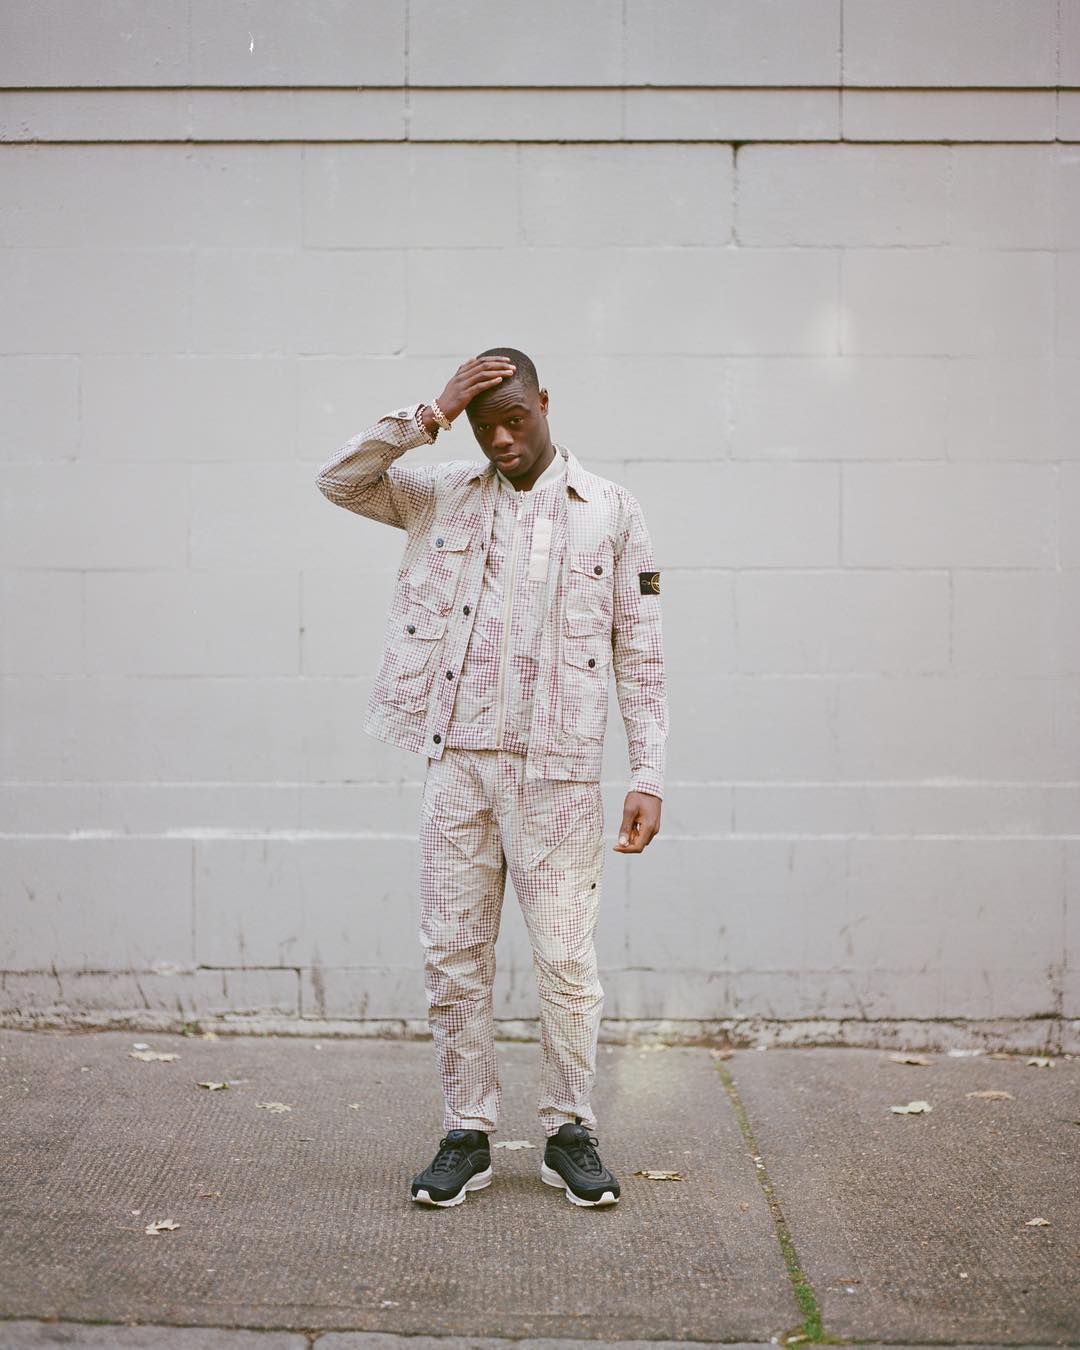 will on Twitter: "J hus in full Stone Island AW17 check grid camo [pattern  by me] https://t.co/ivtbrYGsAe" / Twitter